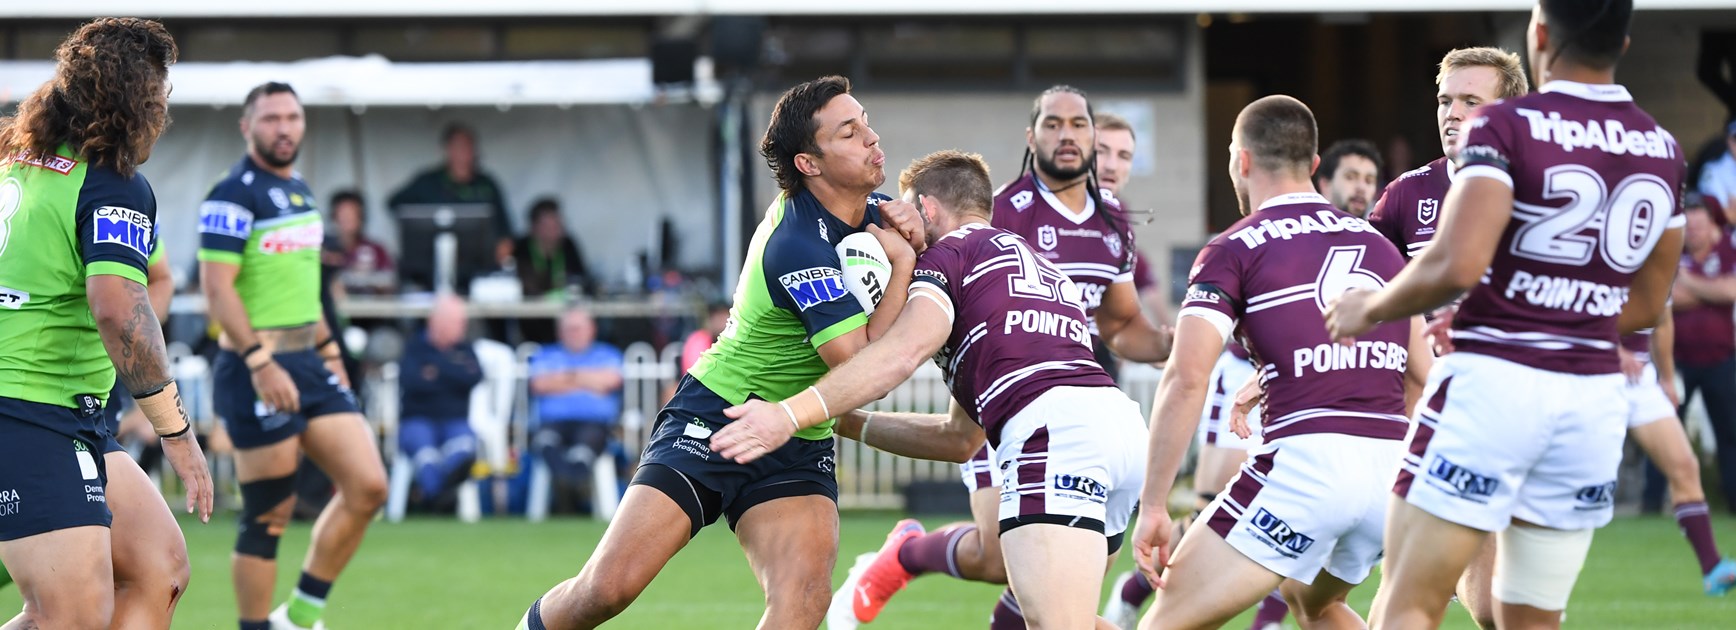 Match Report: Raiders downed by Sea Eagles in Mudgee